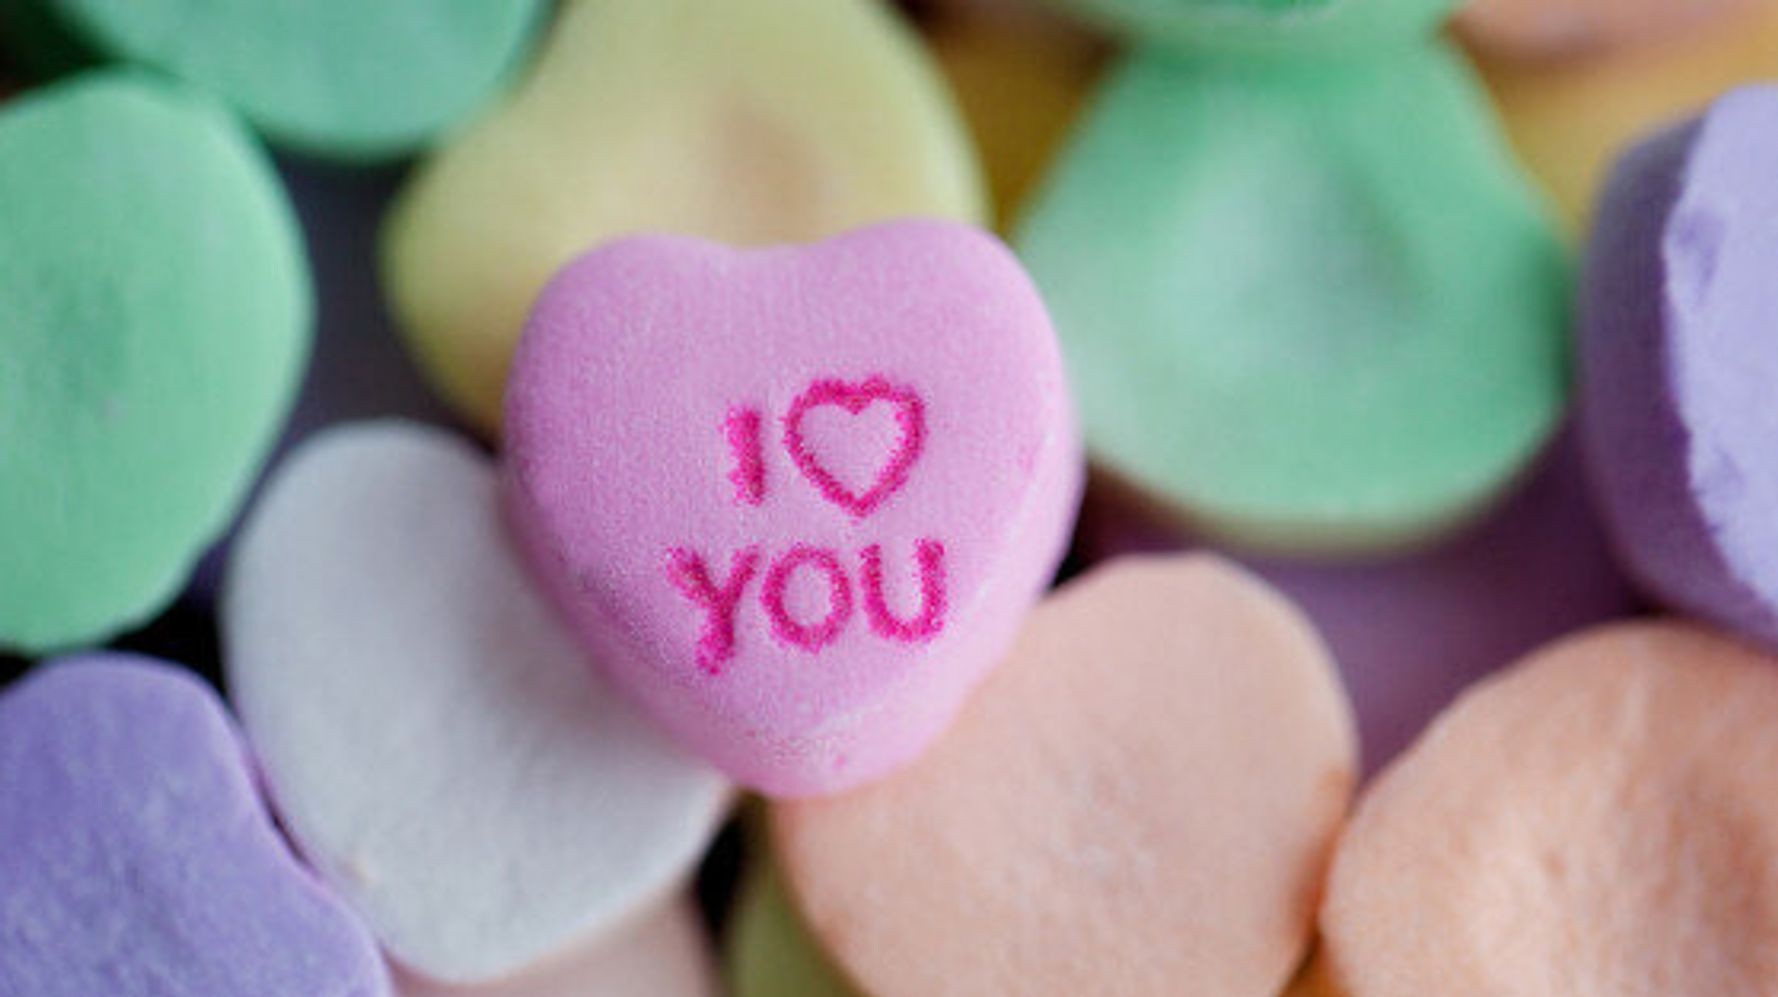 Cute Valentines Day Ideas For Her
 Last Minute Cute Valentine s Day Ideas For Him And Her